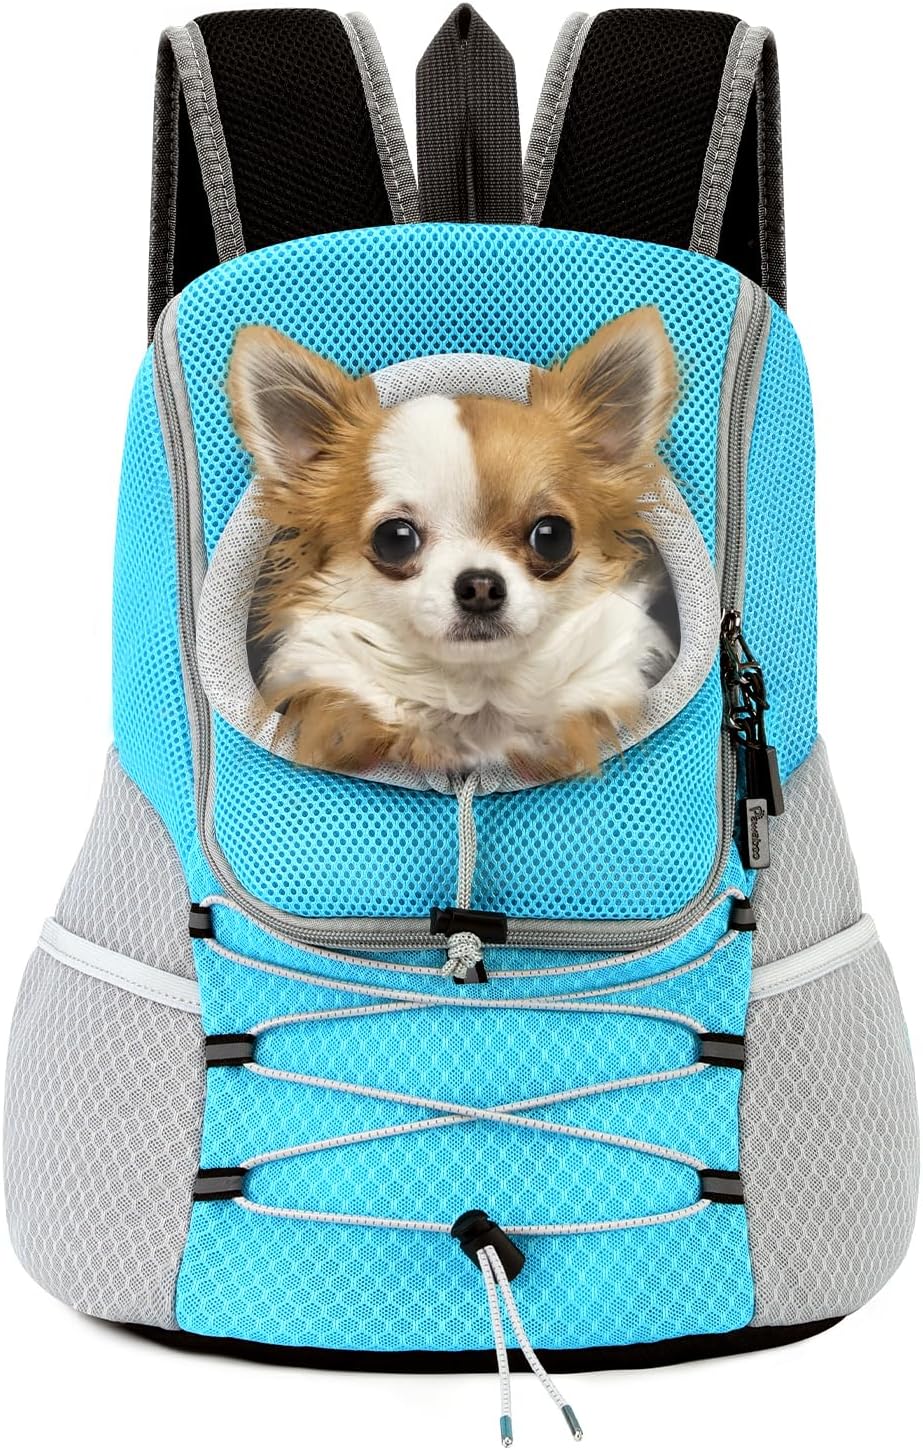 Adjustable Breathable Dog Carrying Backpack